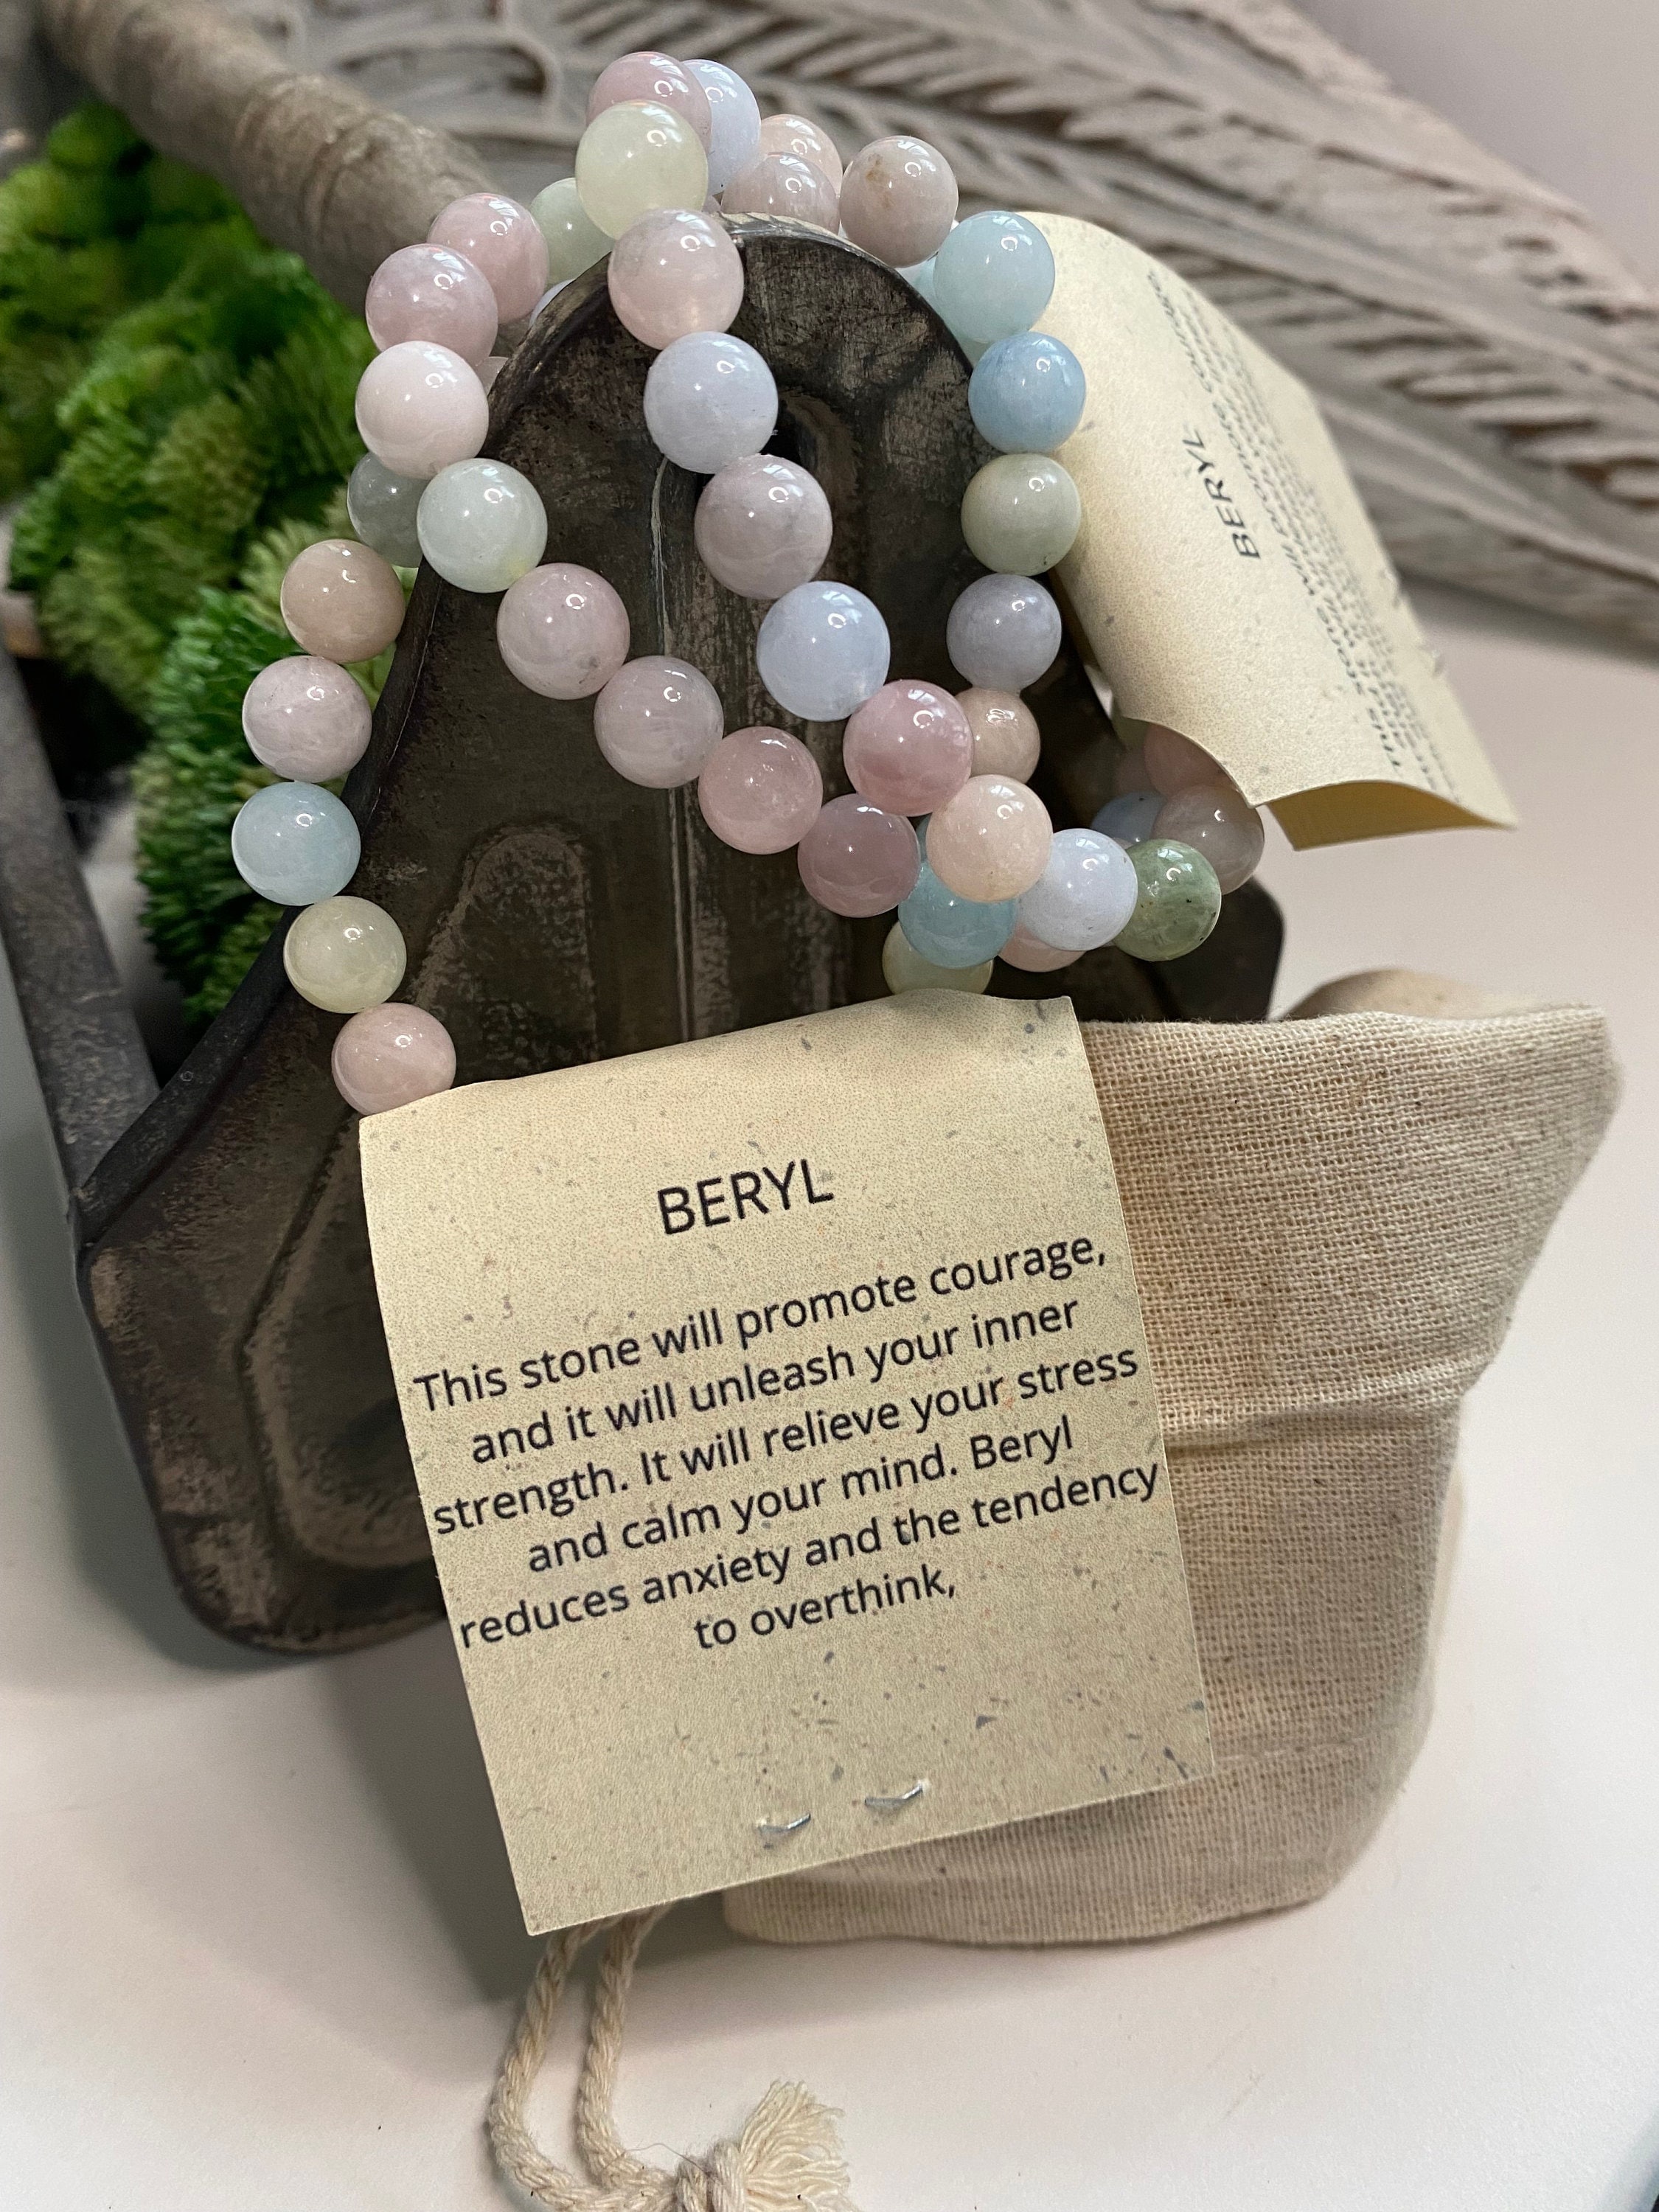 Details about   Natural Gemstone Beryl Bracelets by Healing Light Stones Chip or Round Bead 